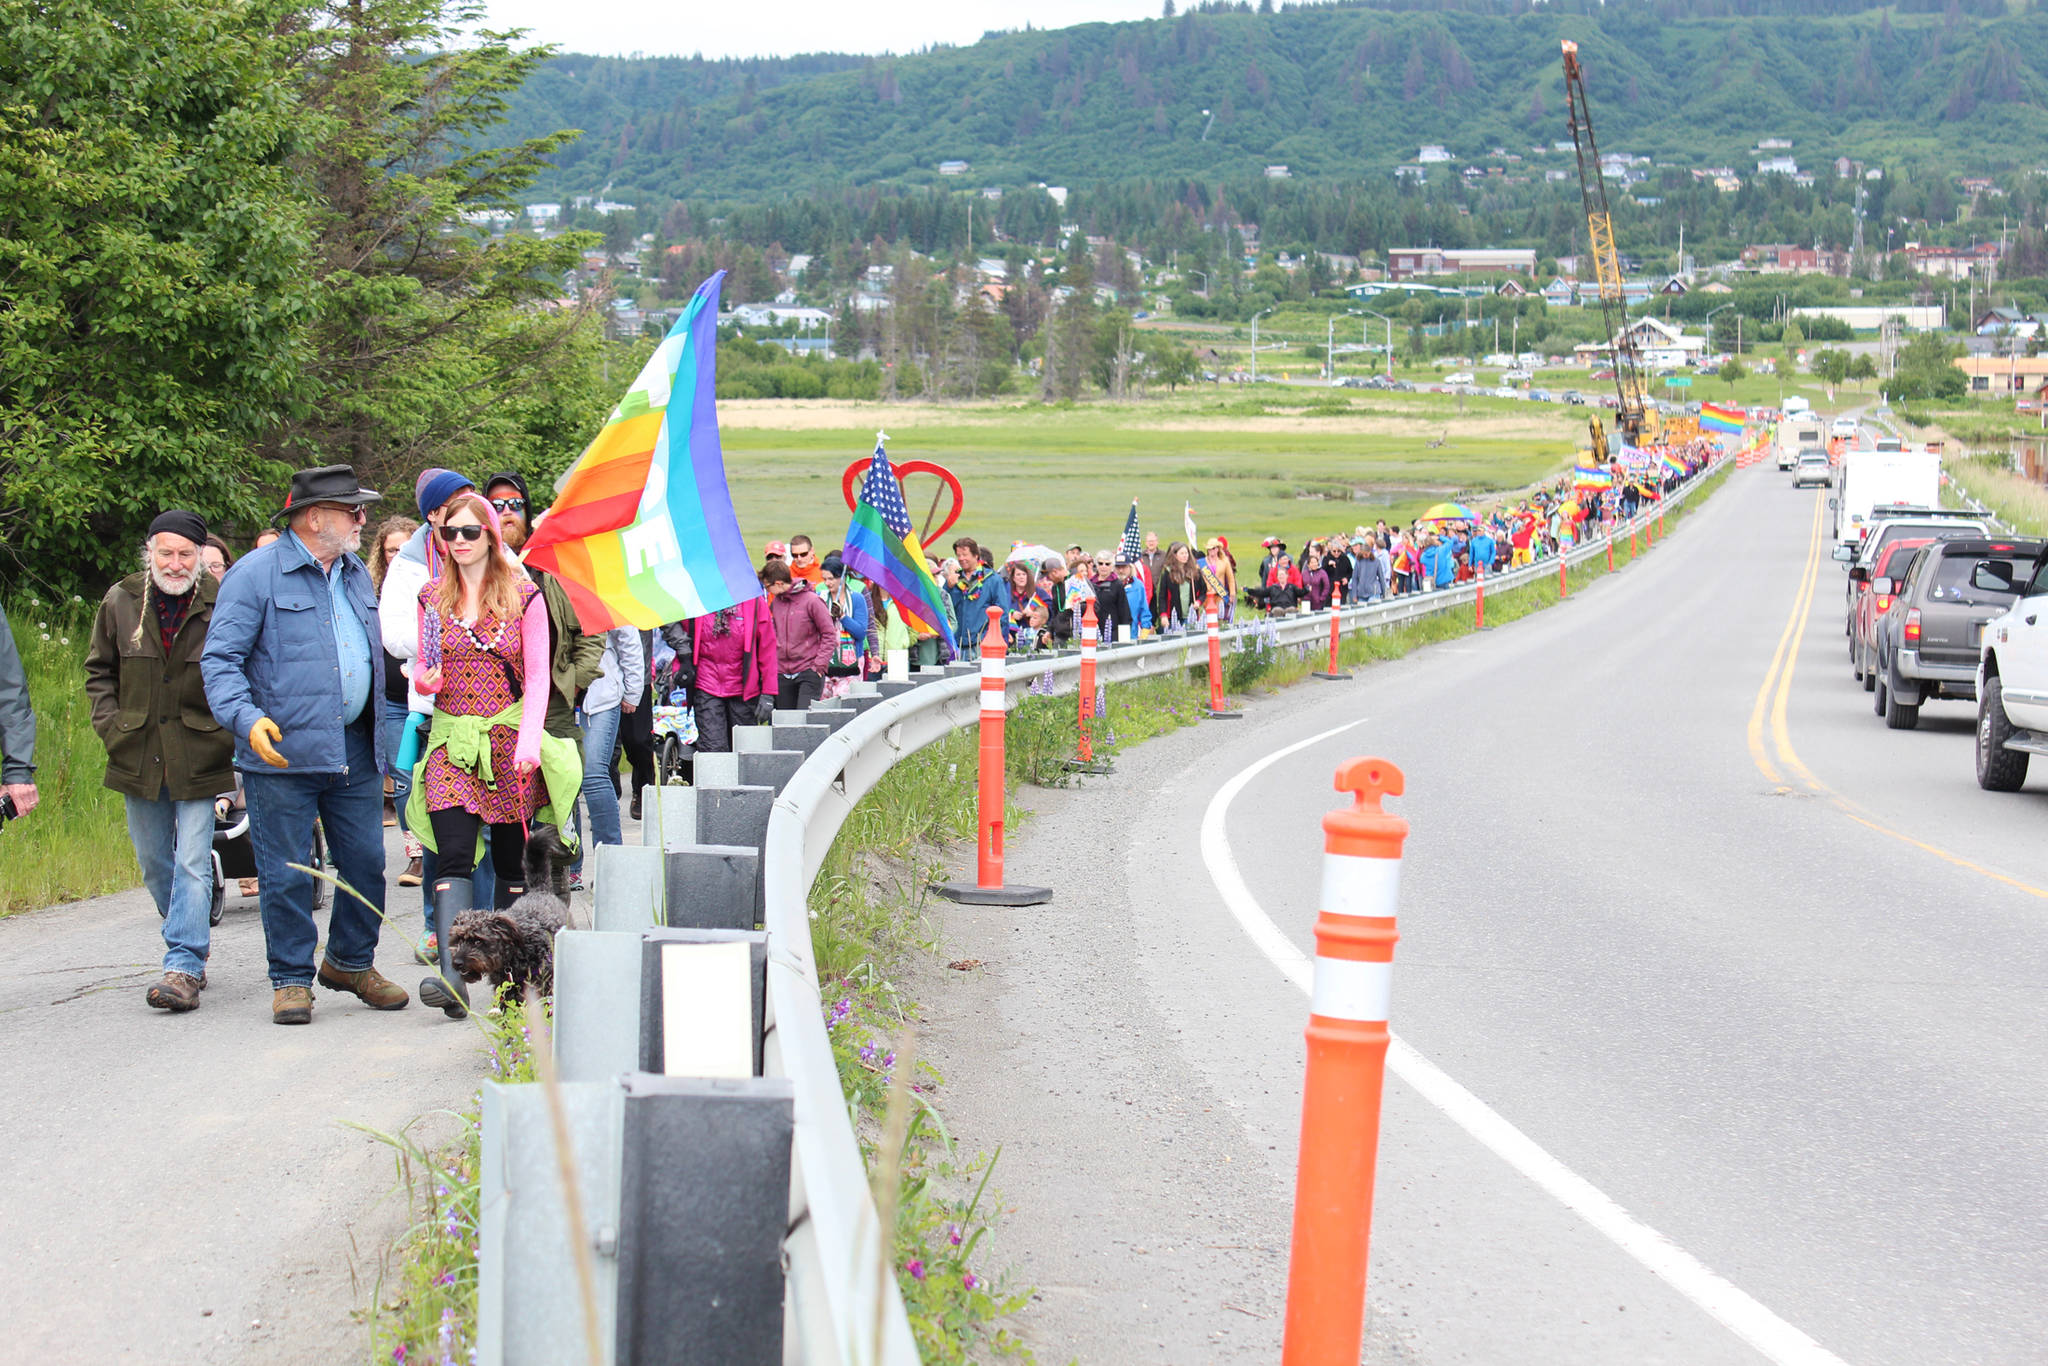 Participants in Homer’s first ever Pride March make their way across the Beluga Slough on Saturday, June 23, 2018 in Homer, Alaska. About 280 men, women and children turned out for the event. (Photo by Megan Pacer/Homer News)